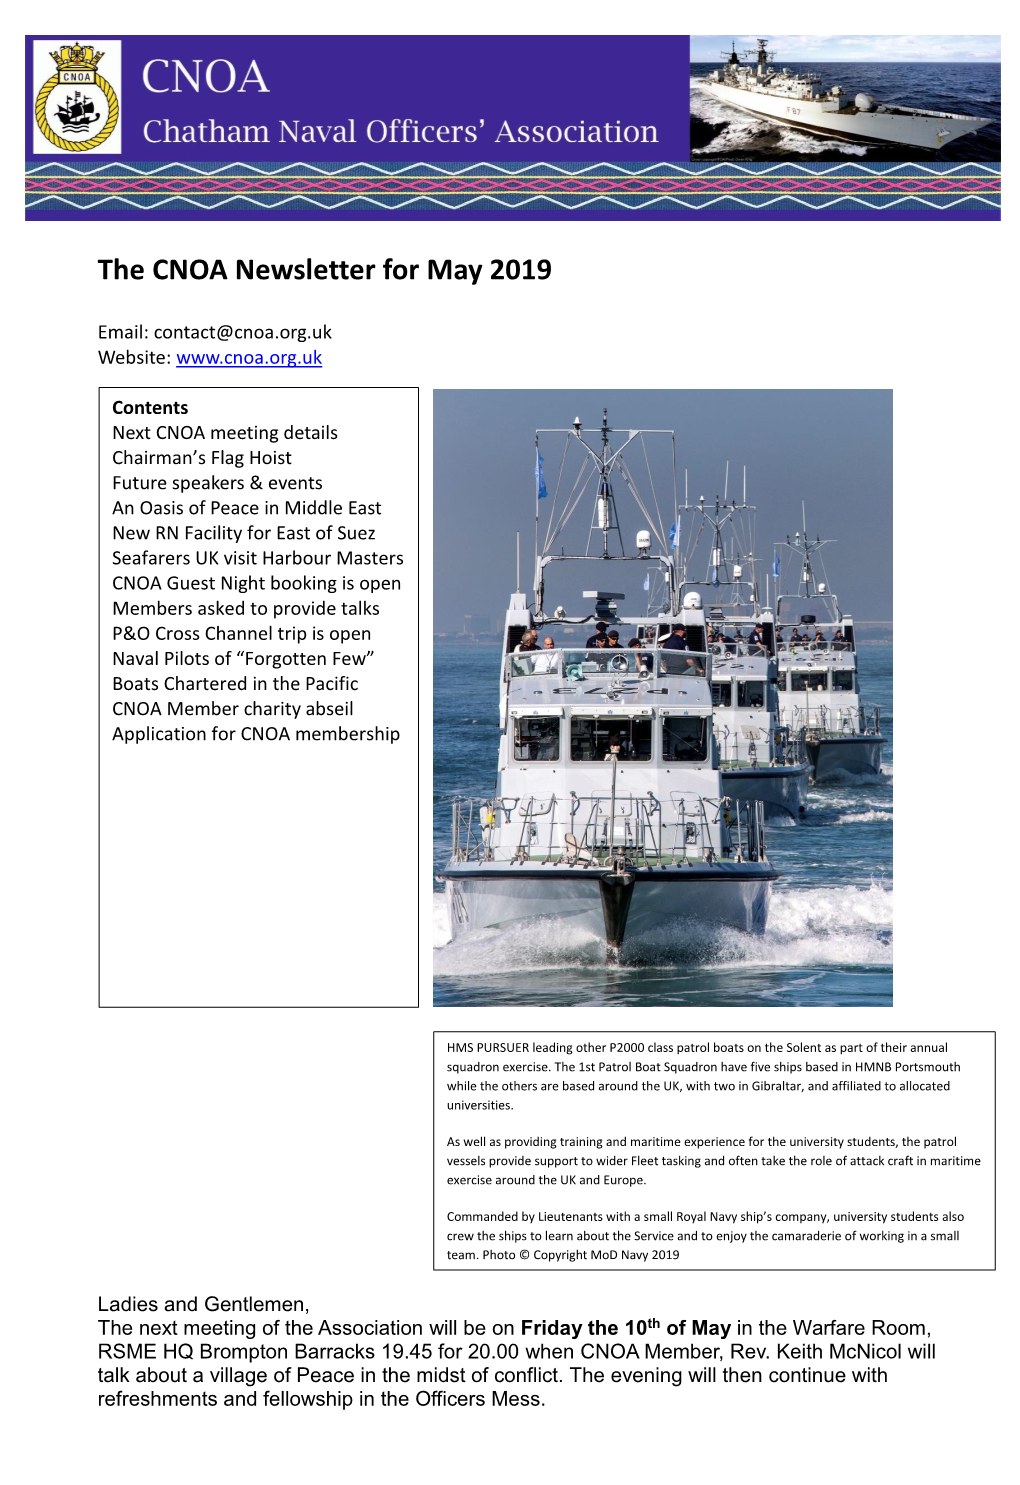 The CNOA Newsletter for May 2019